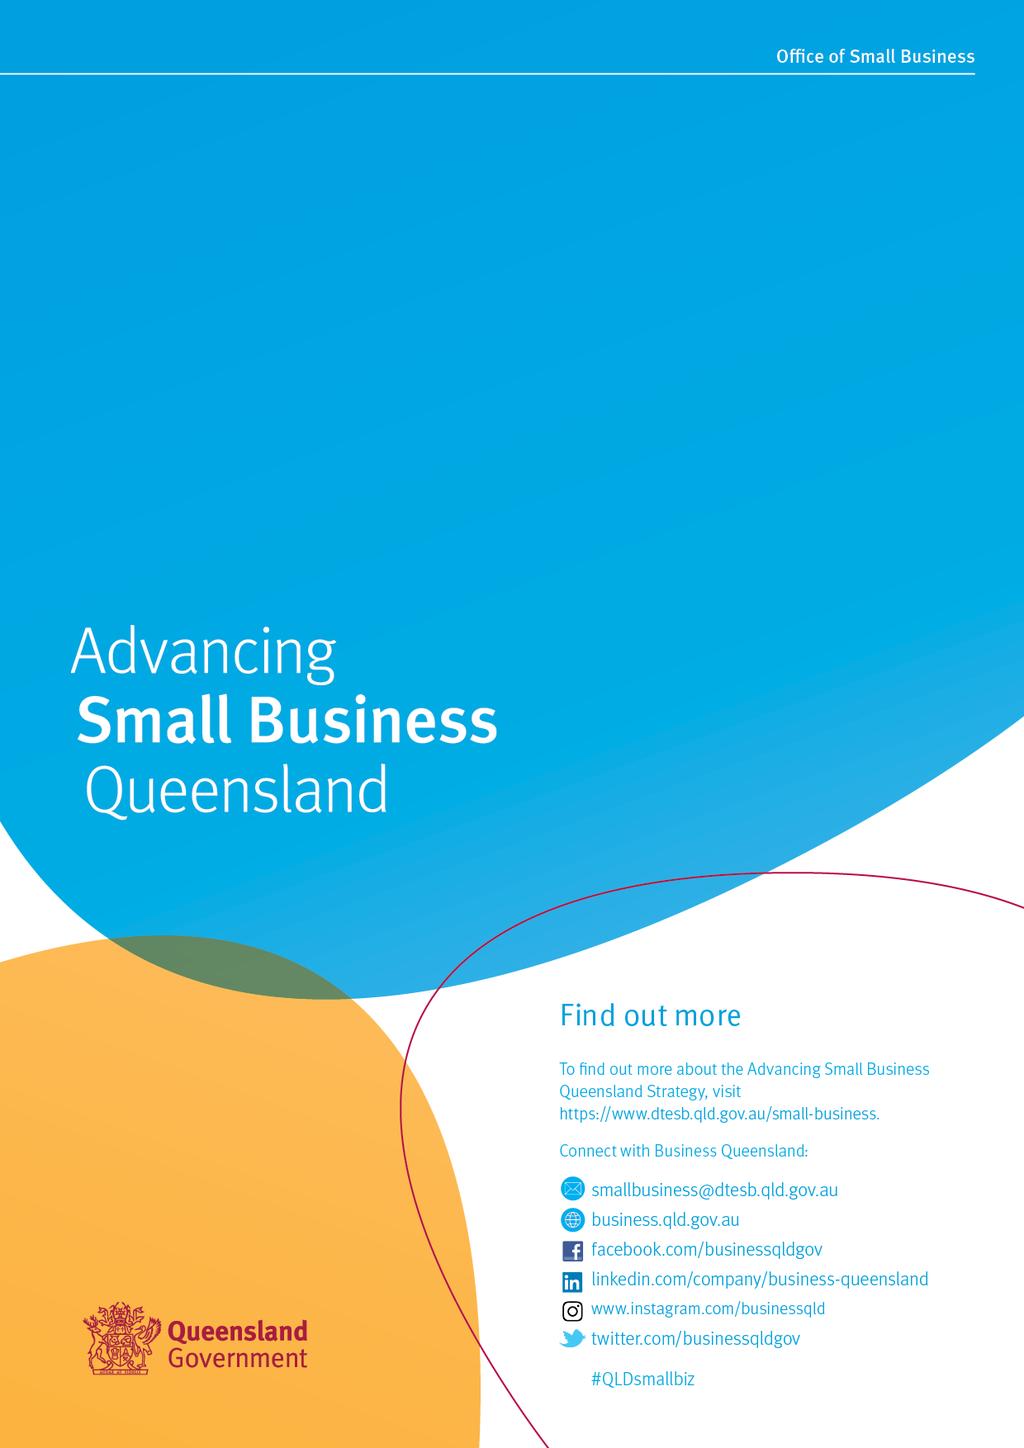 Find out more To find out more about the Advancing Small Business Queensland Strategy, visit https://www.dtesb.qld.gov.